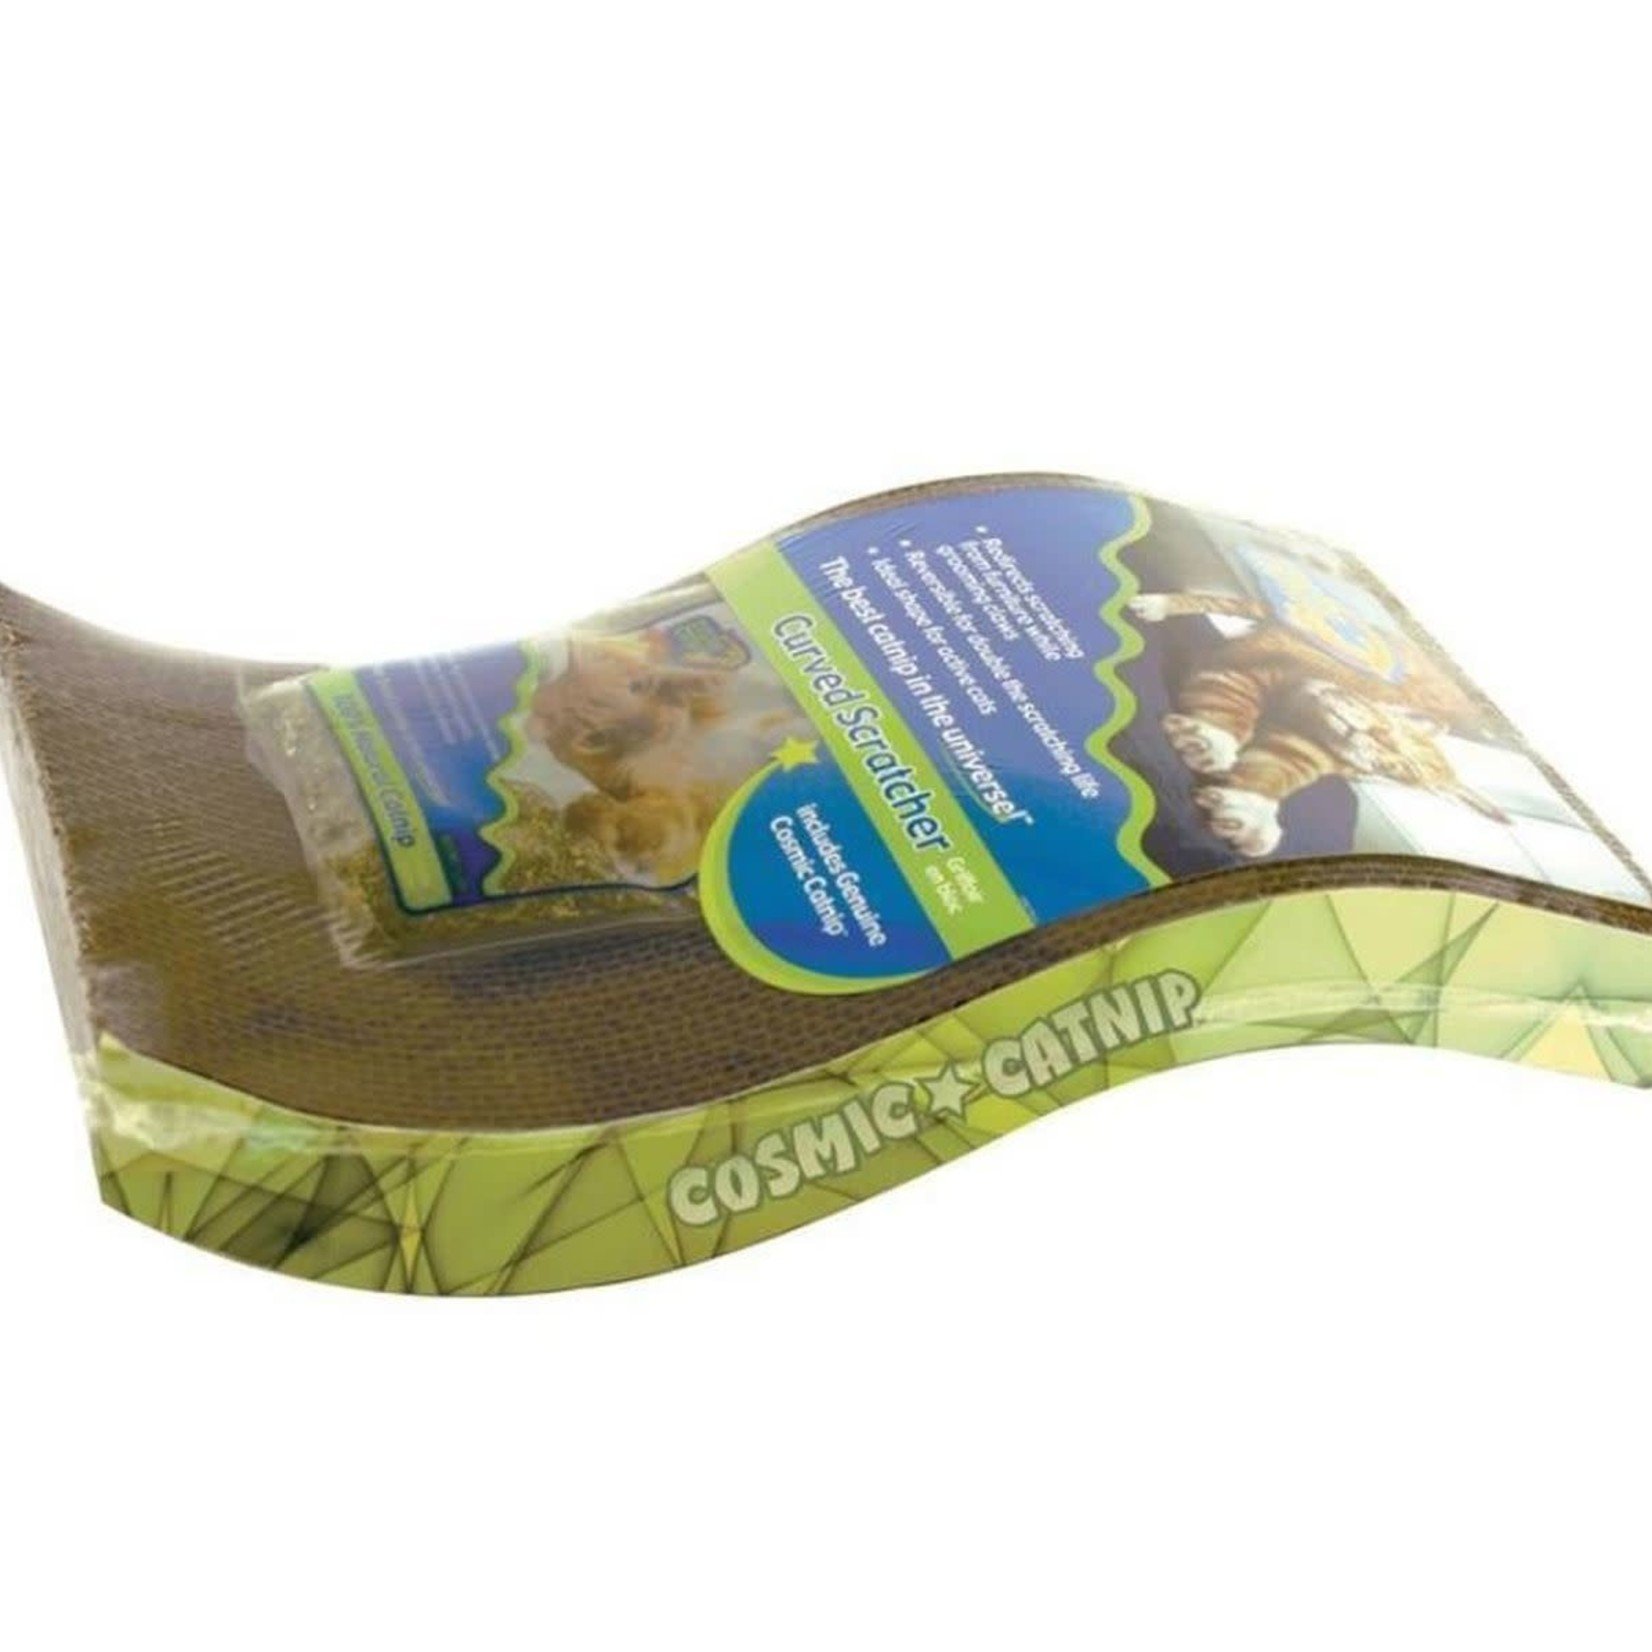 Our Pets Company Our Pets Cosmic Wave Catnip Scratcher